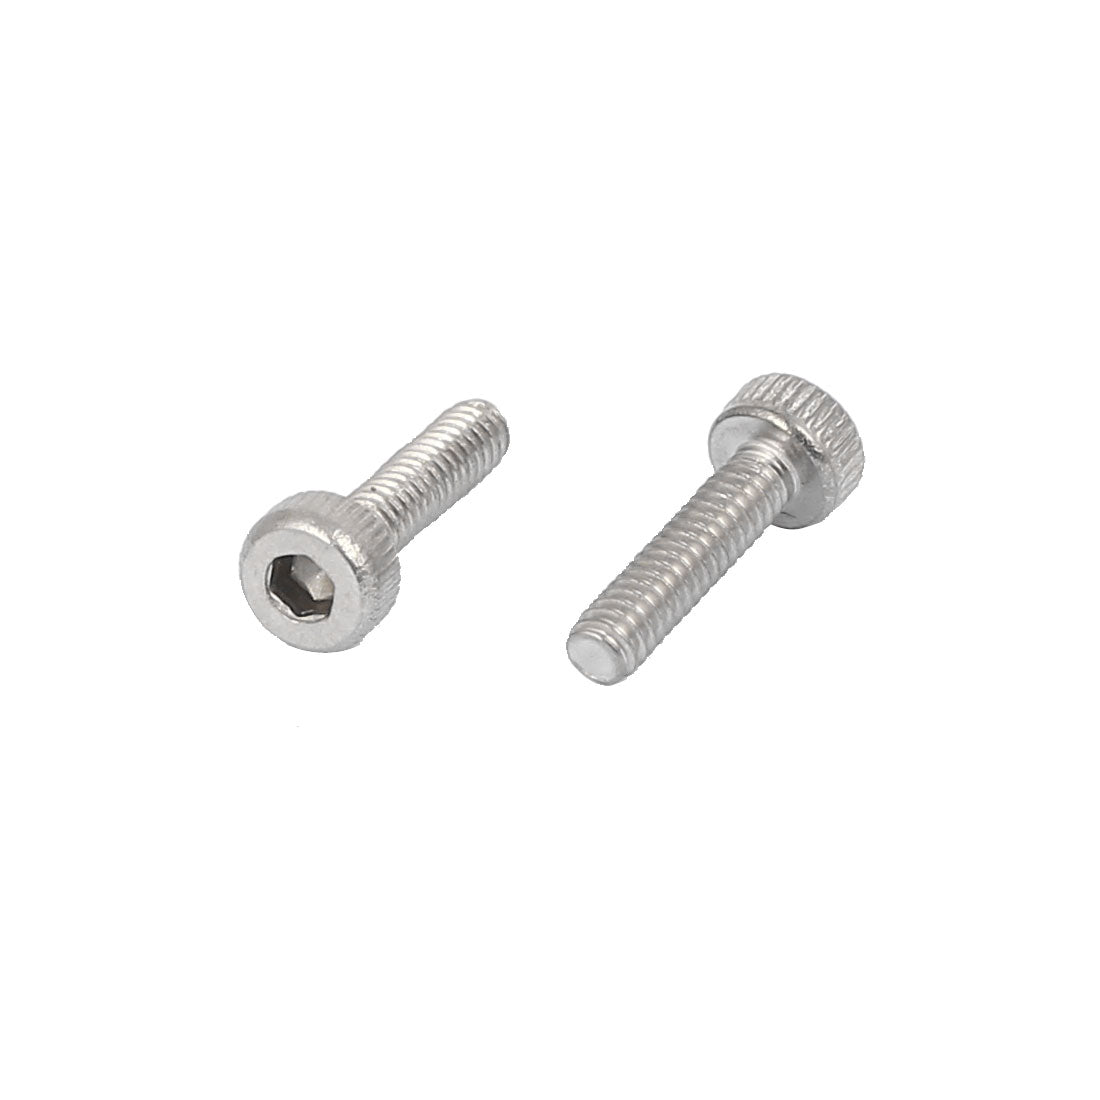 uxcell Uxcell M2 x 8mm 0.4mm Pitch 304 Stainless Steel Hex Socket Head Cap Screw DIN912 120pcs